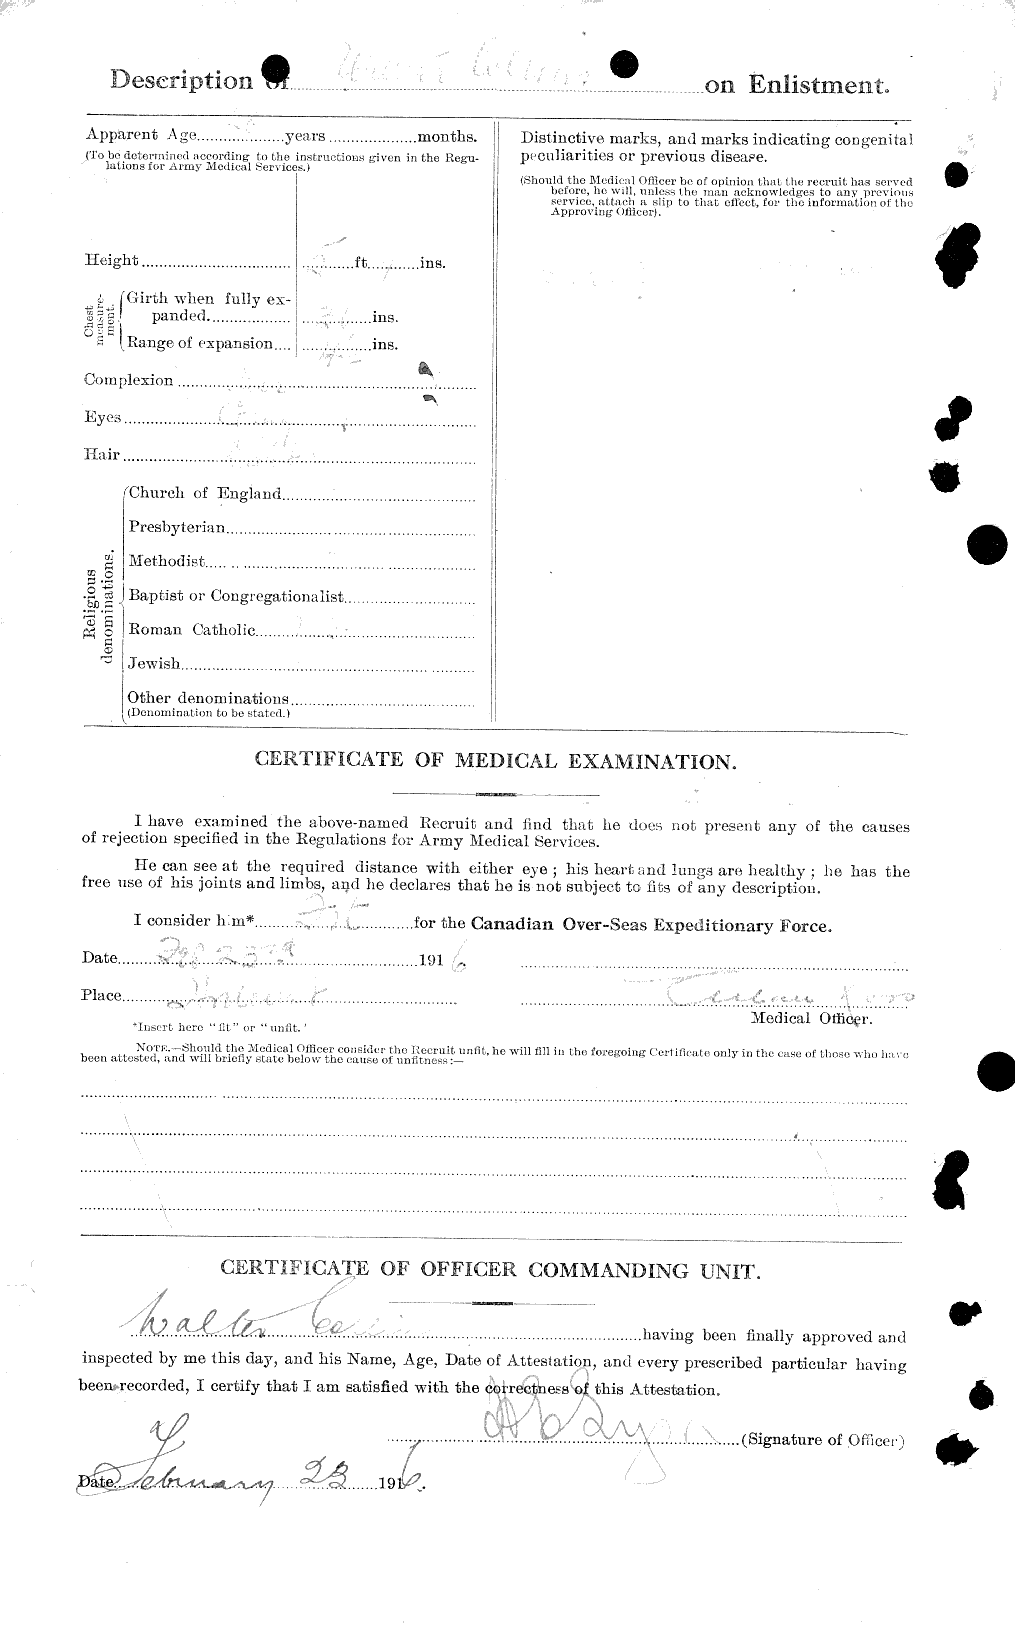 Personnel Records of the First World War - CEF 040690b